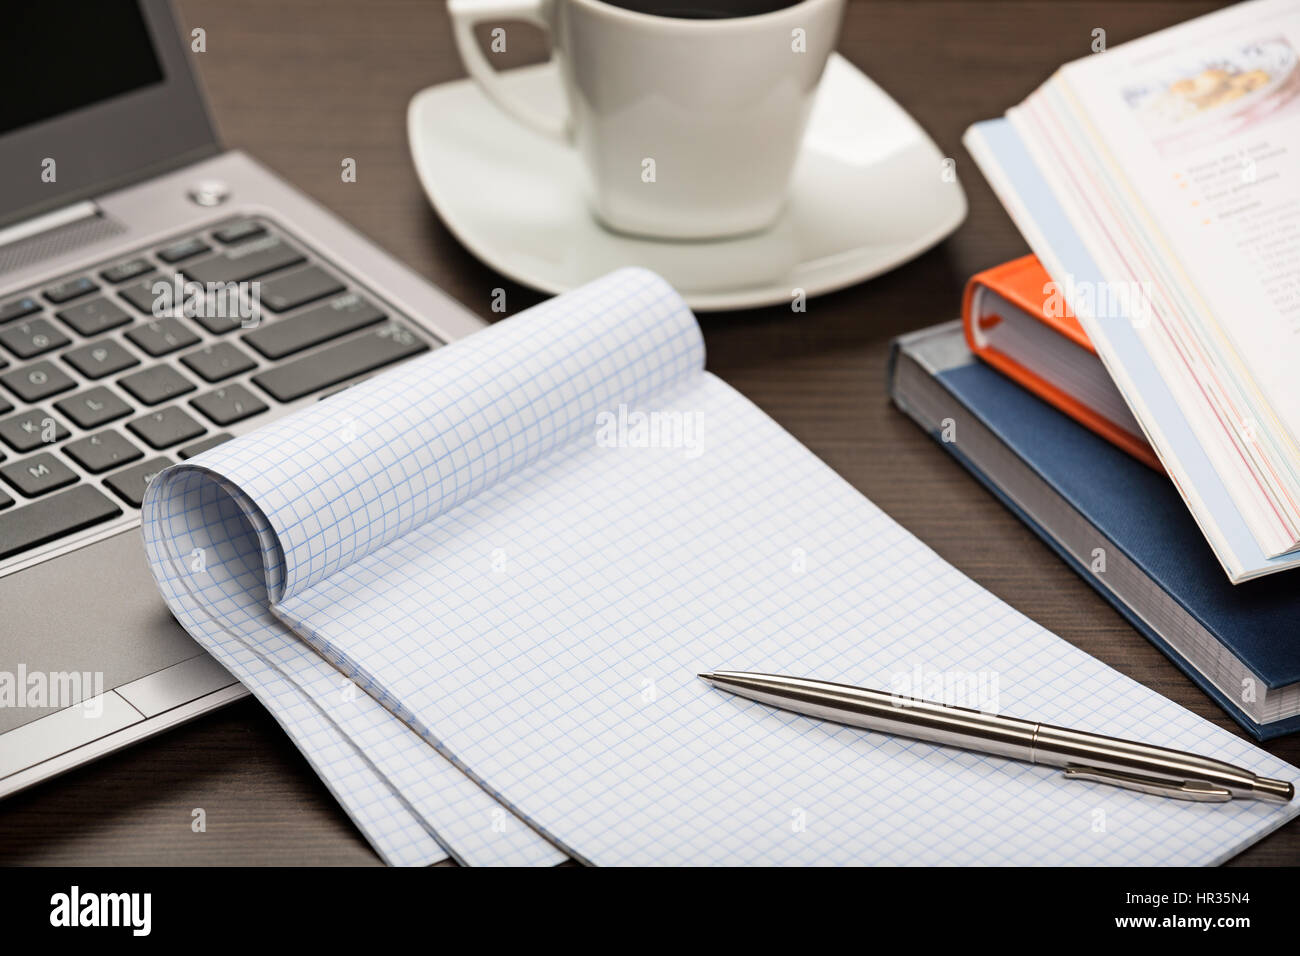 Notepad, pen, books, laptop and cup of coffee on dark wooden office desk  Stock Photo - Alamy